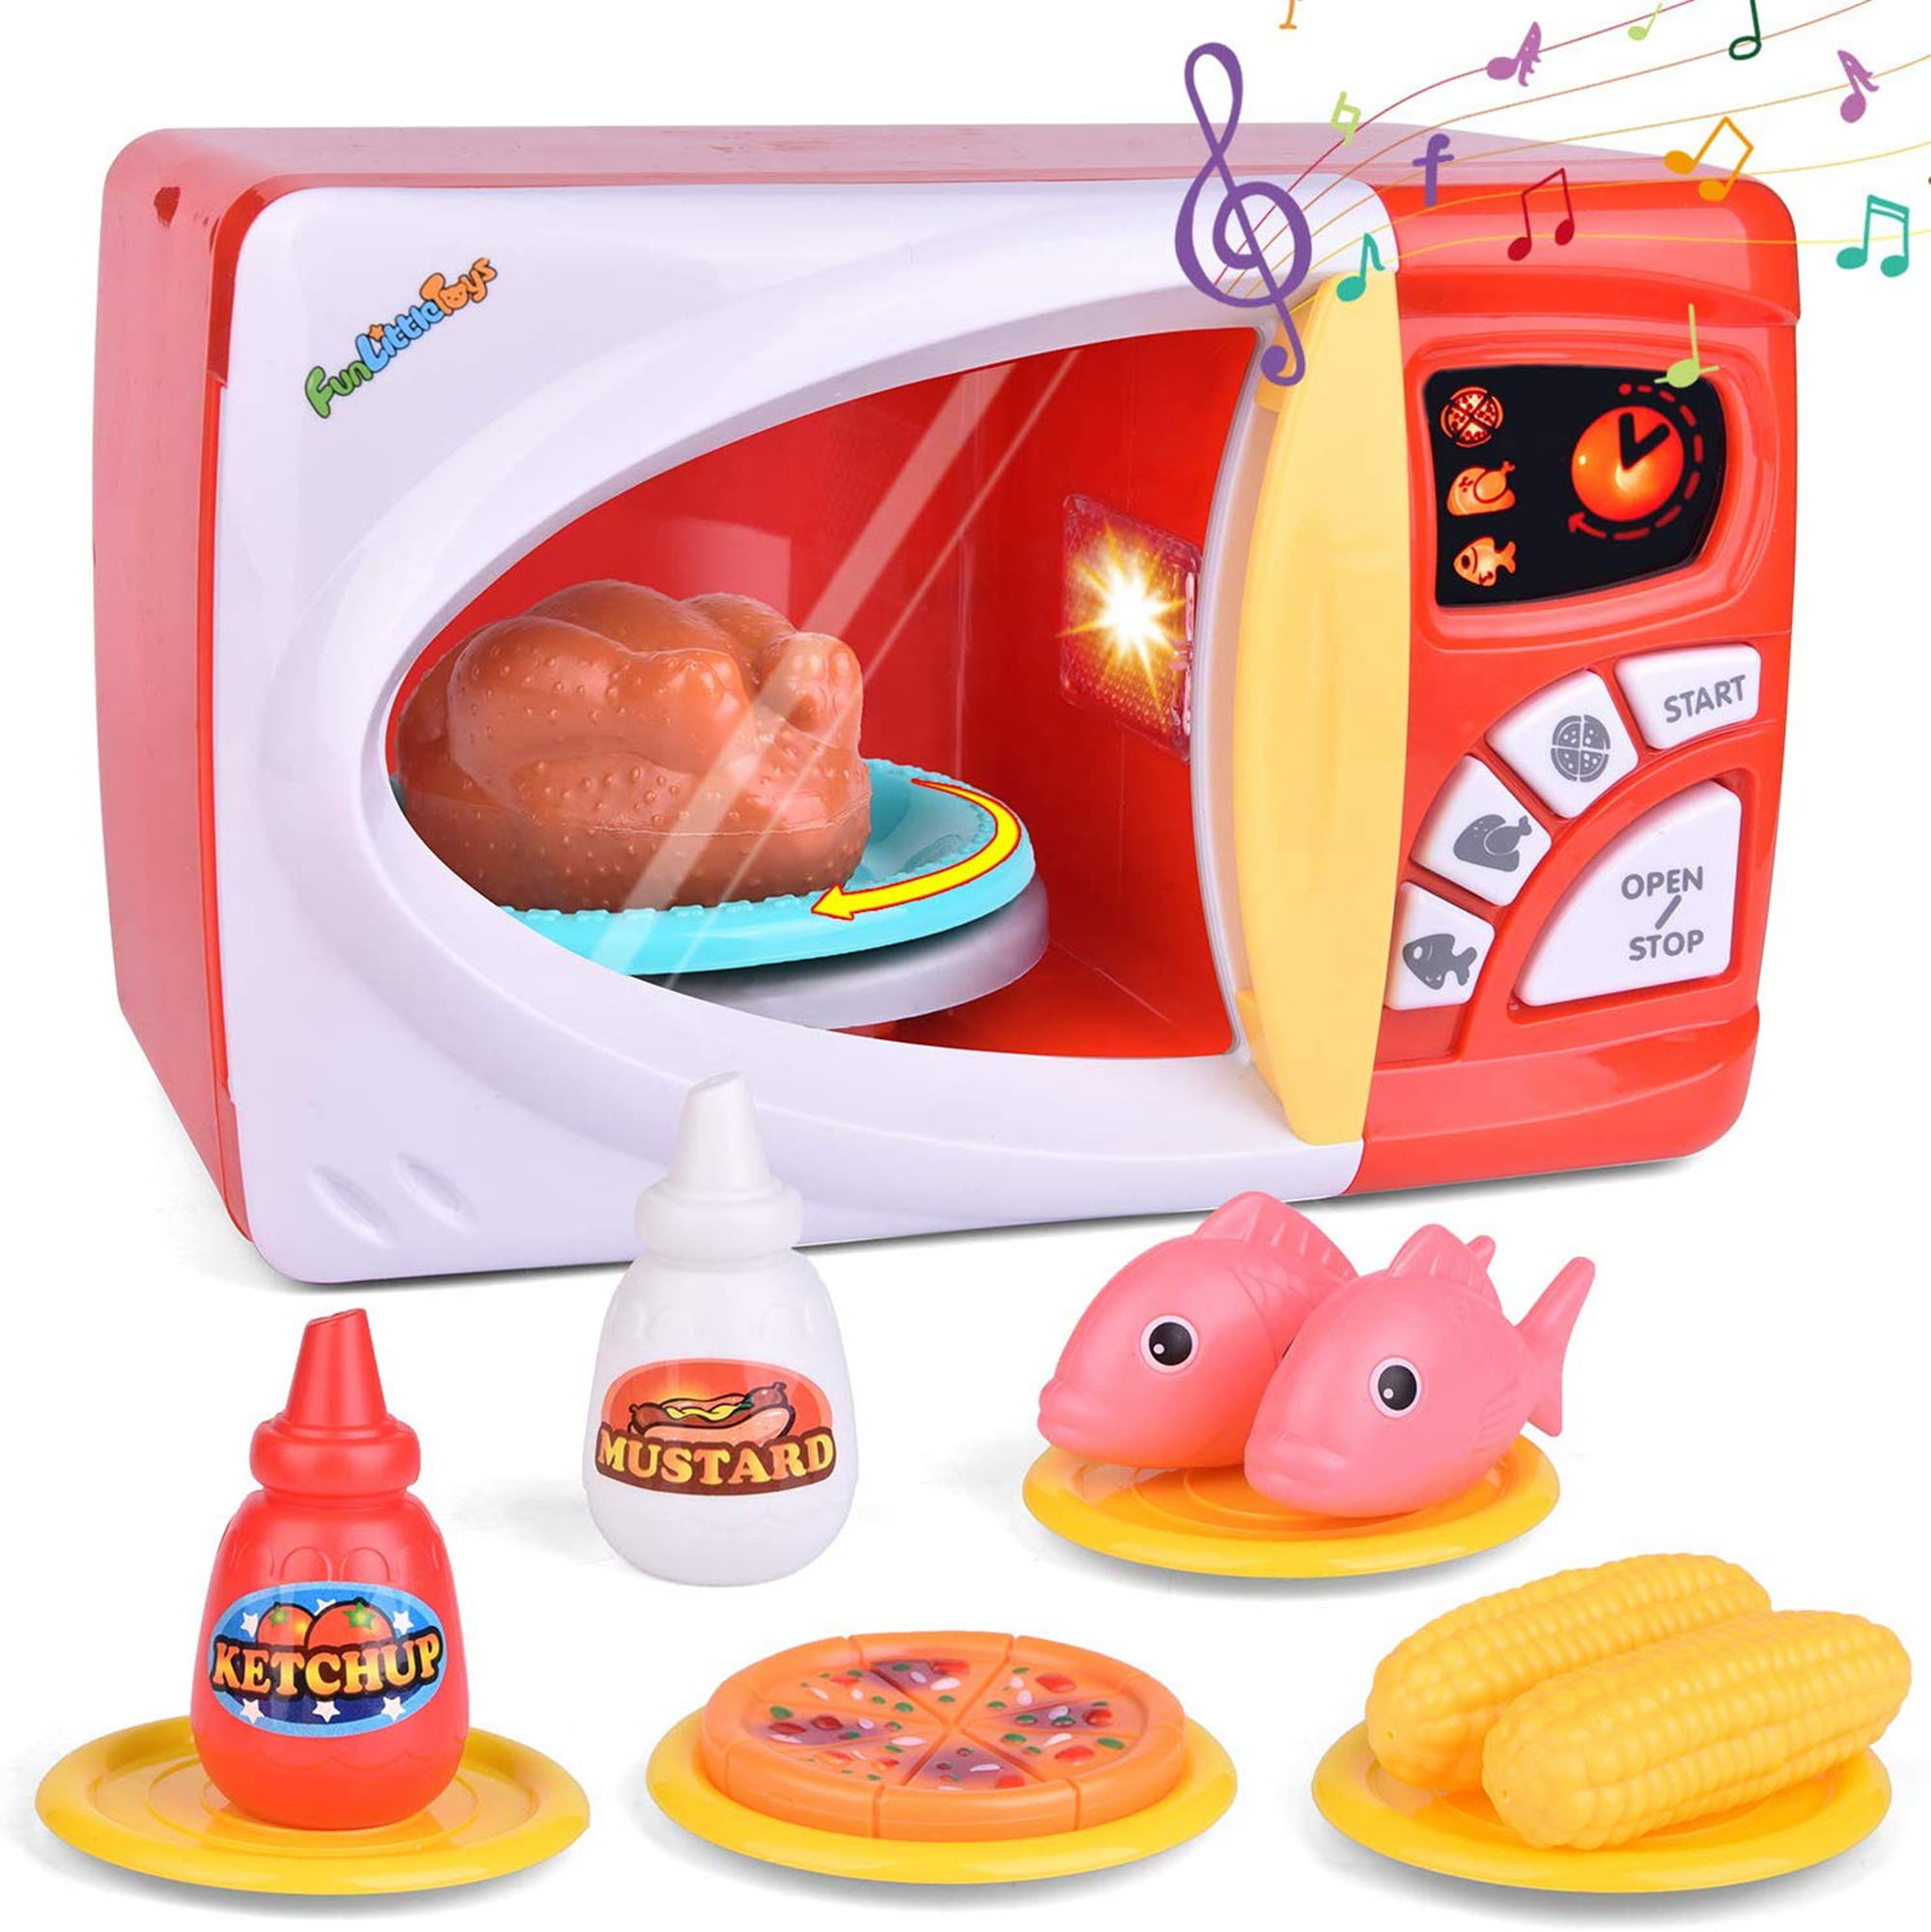 Kids Cooking Role Play Toy Kitchen Set Microwave Kettle Toaster Children's Gift 